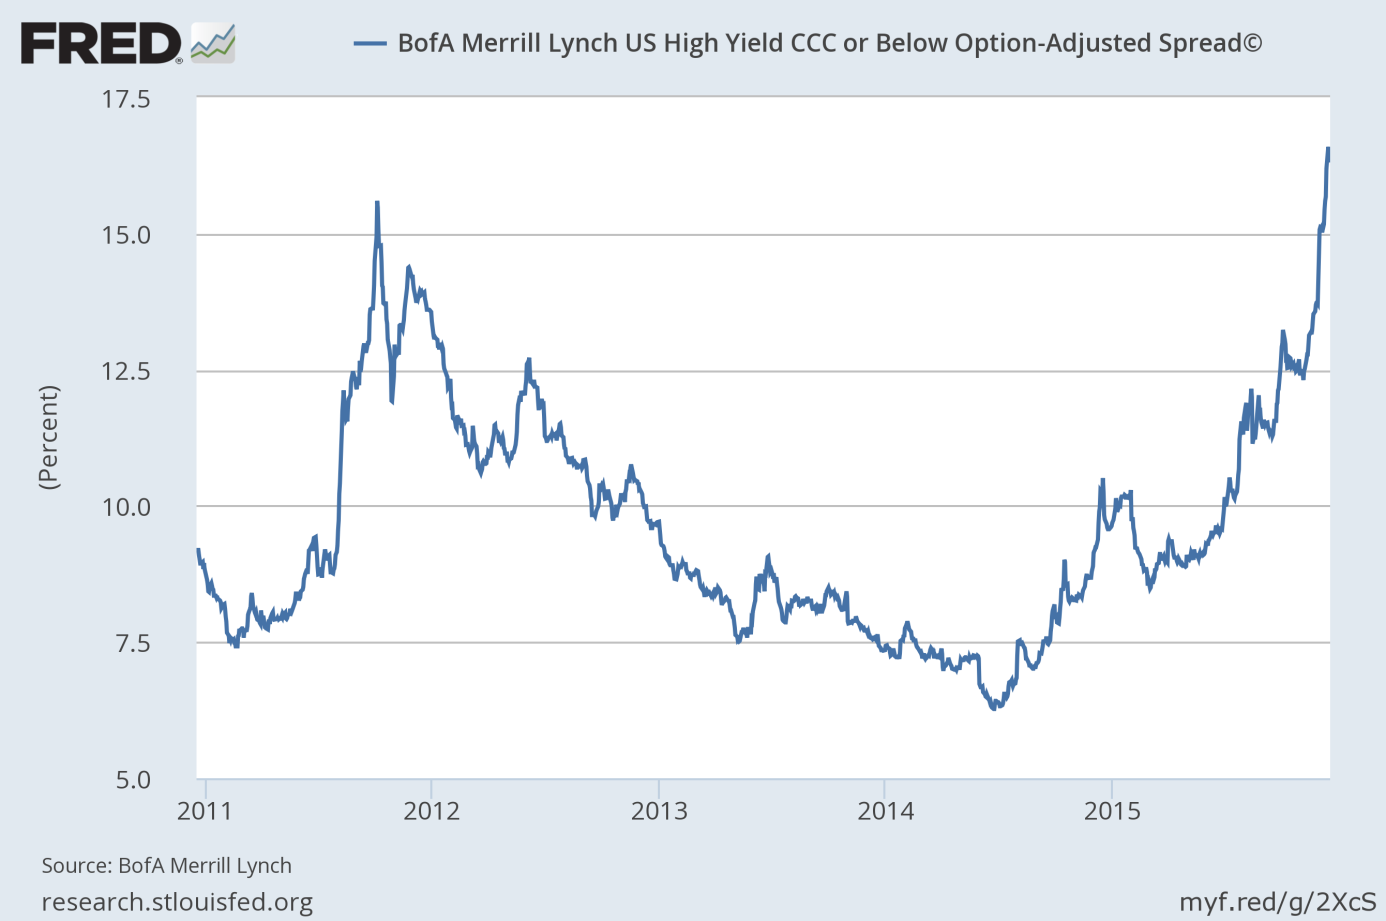 The spread between corporate bonds rated CCC and below and Treasury bonds from 2010 to 2015